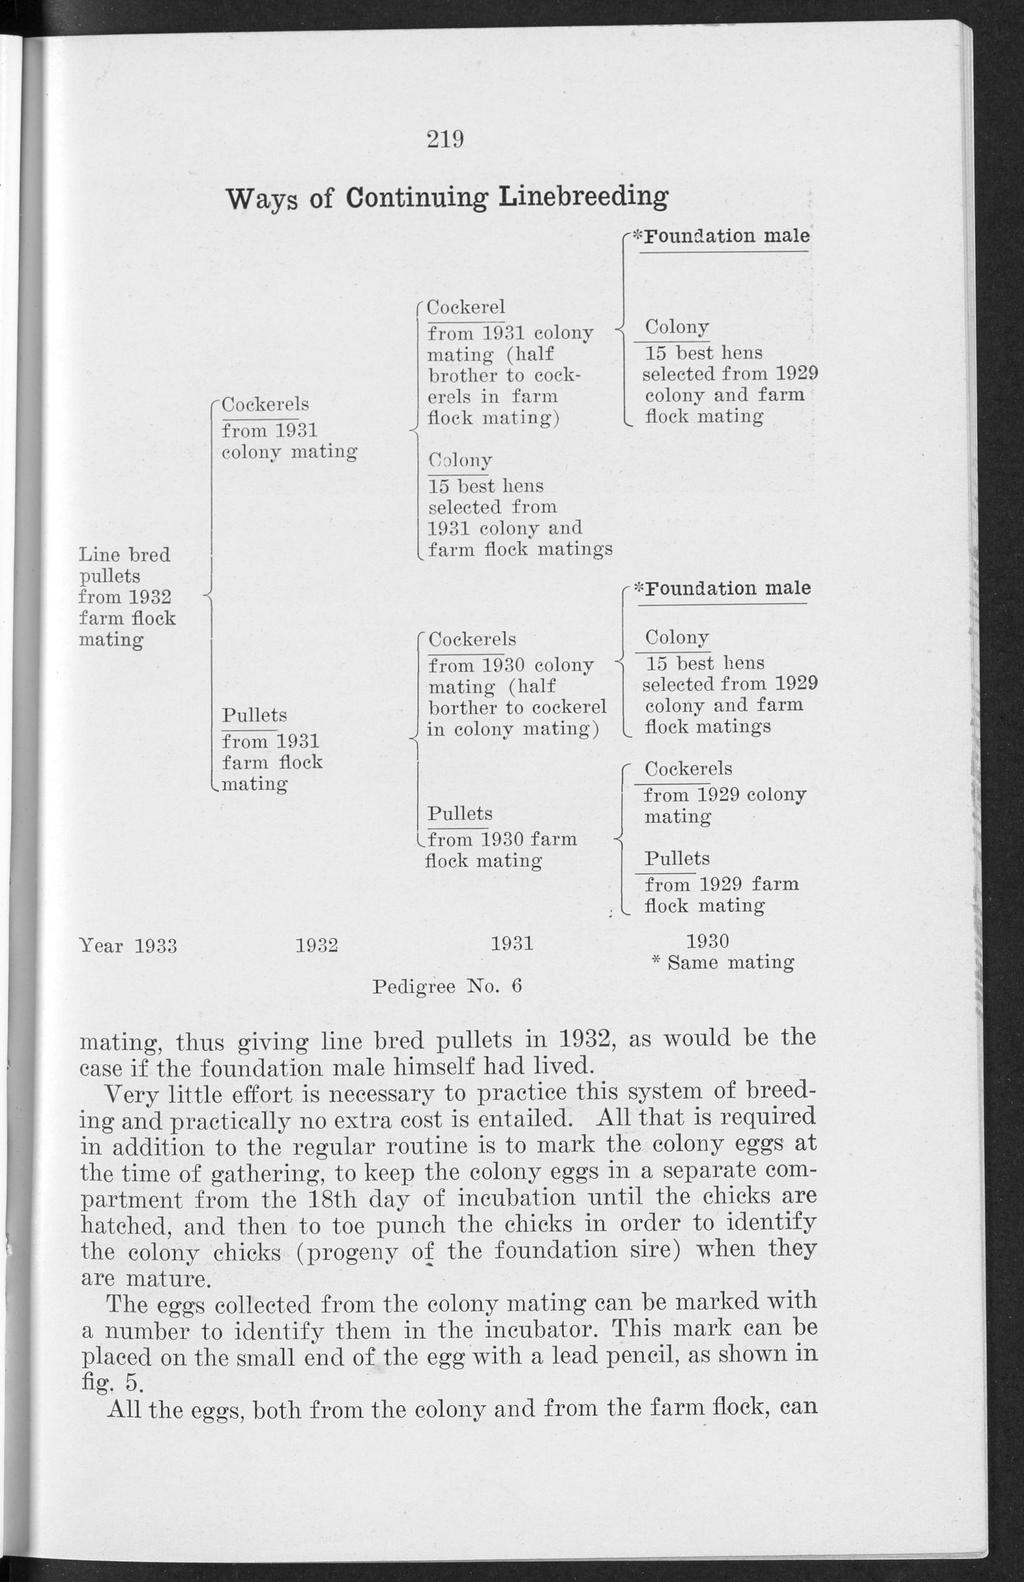 Knox: A simple linebreeding program for poultry breeders 219 Ways of Continuing Linebreeding r*foundation male Line bred pullets from 1932 farm flock mating ^Cockerels from 1931 colony mating from